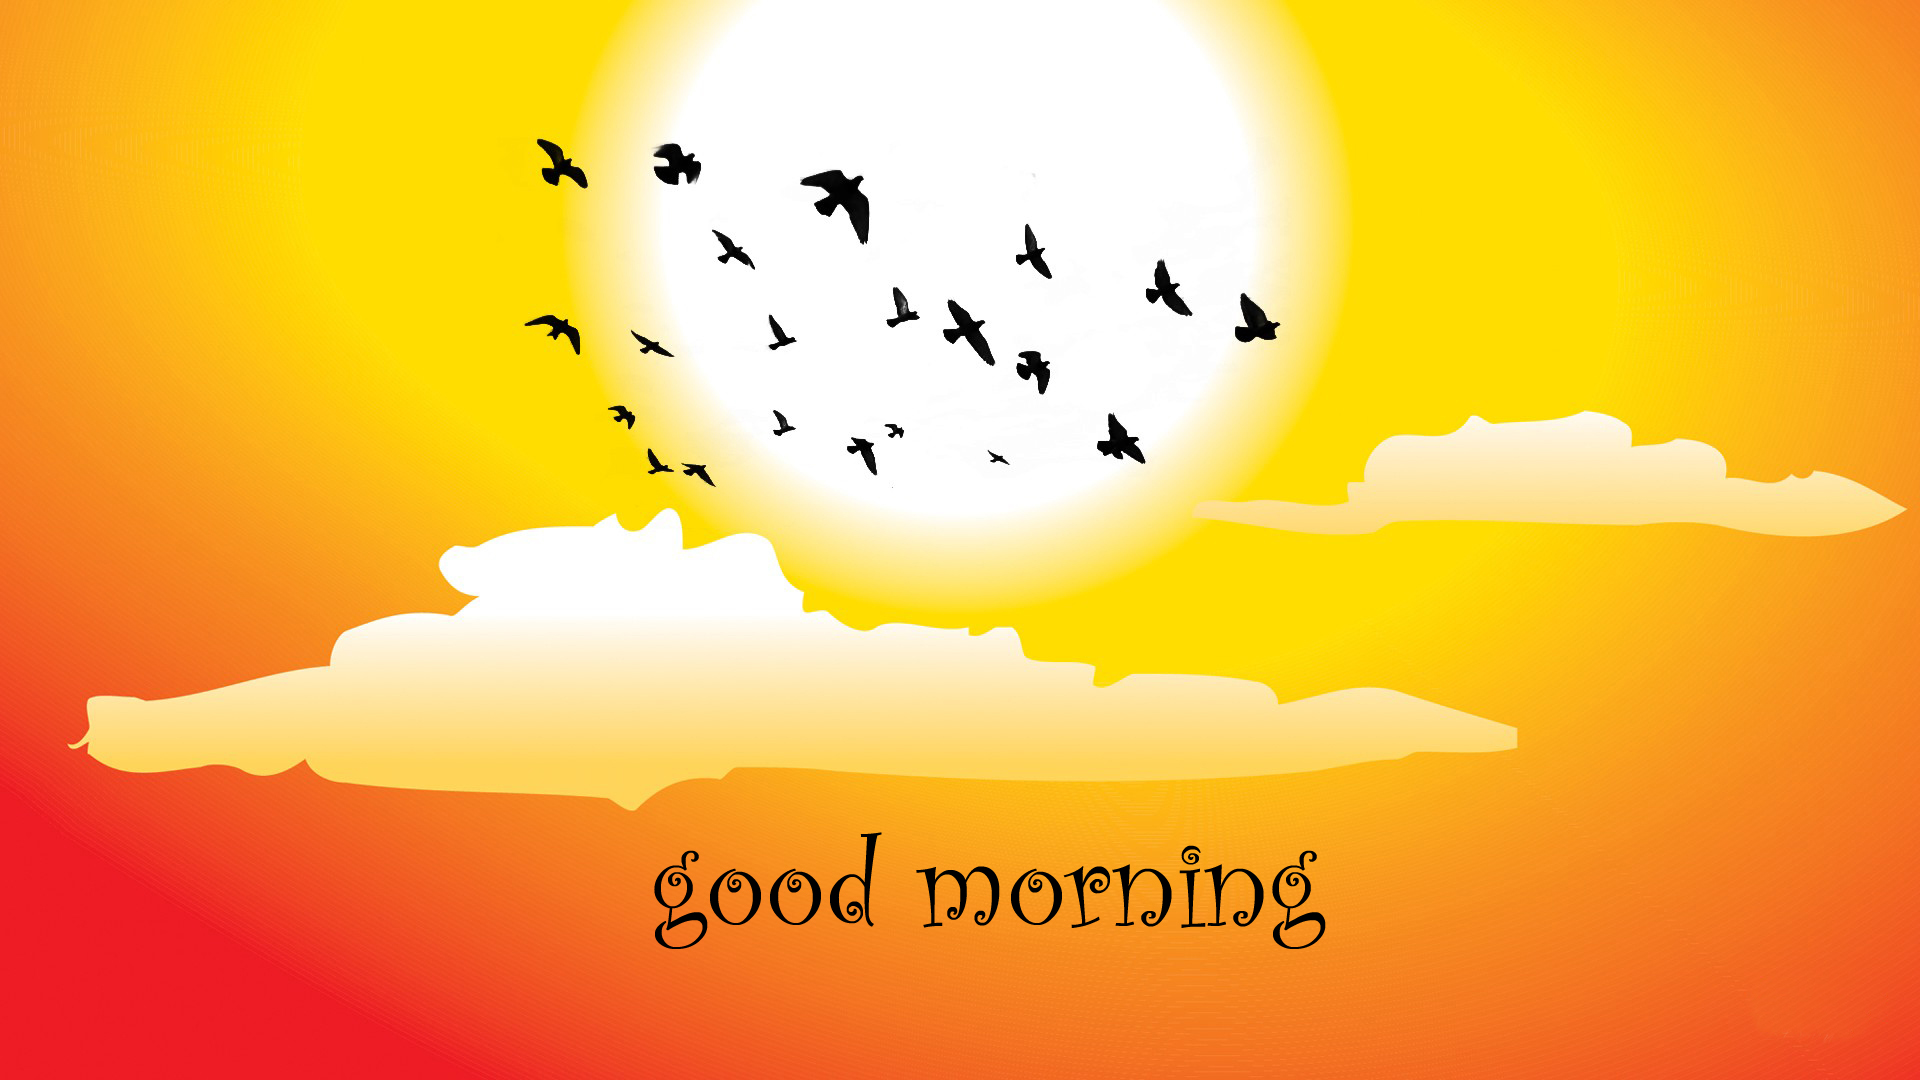 Good Morning HD Wallpaper Pictures